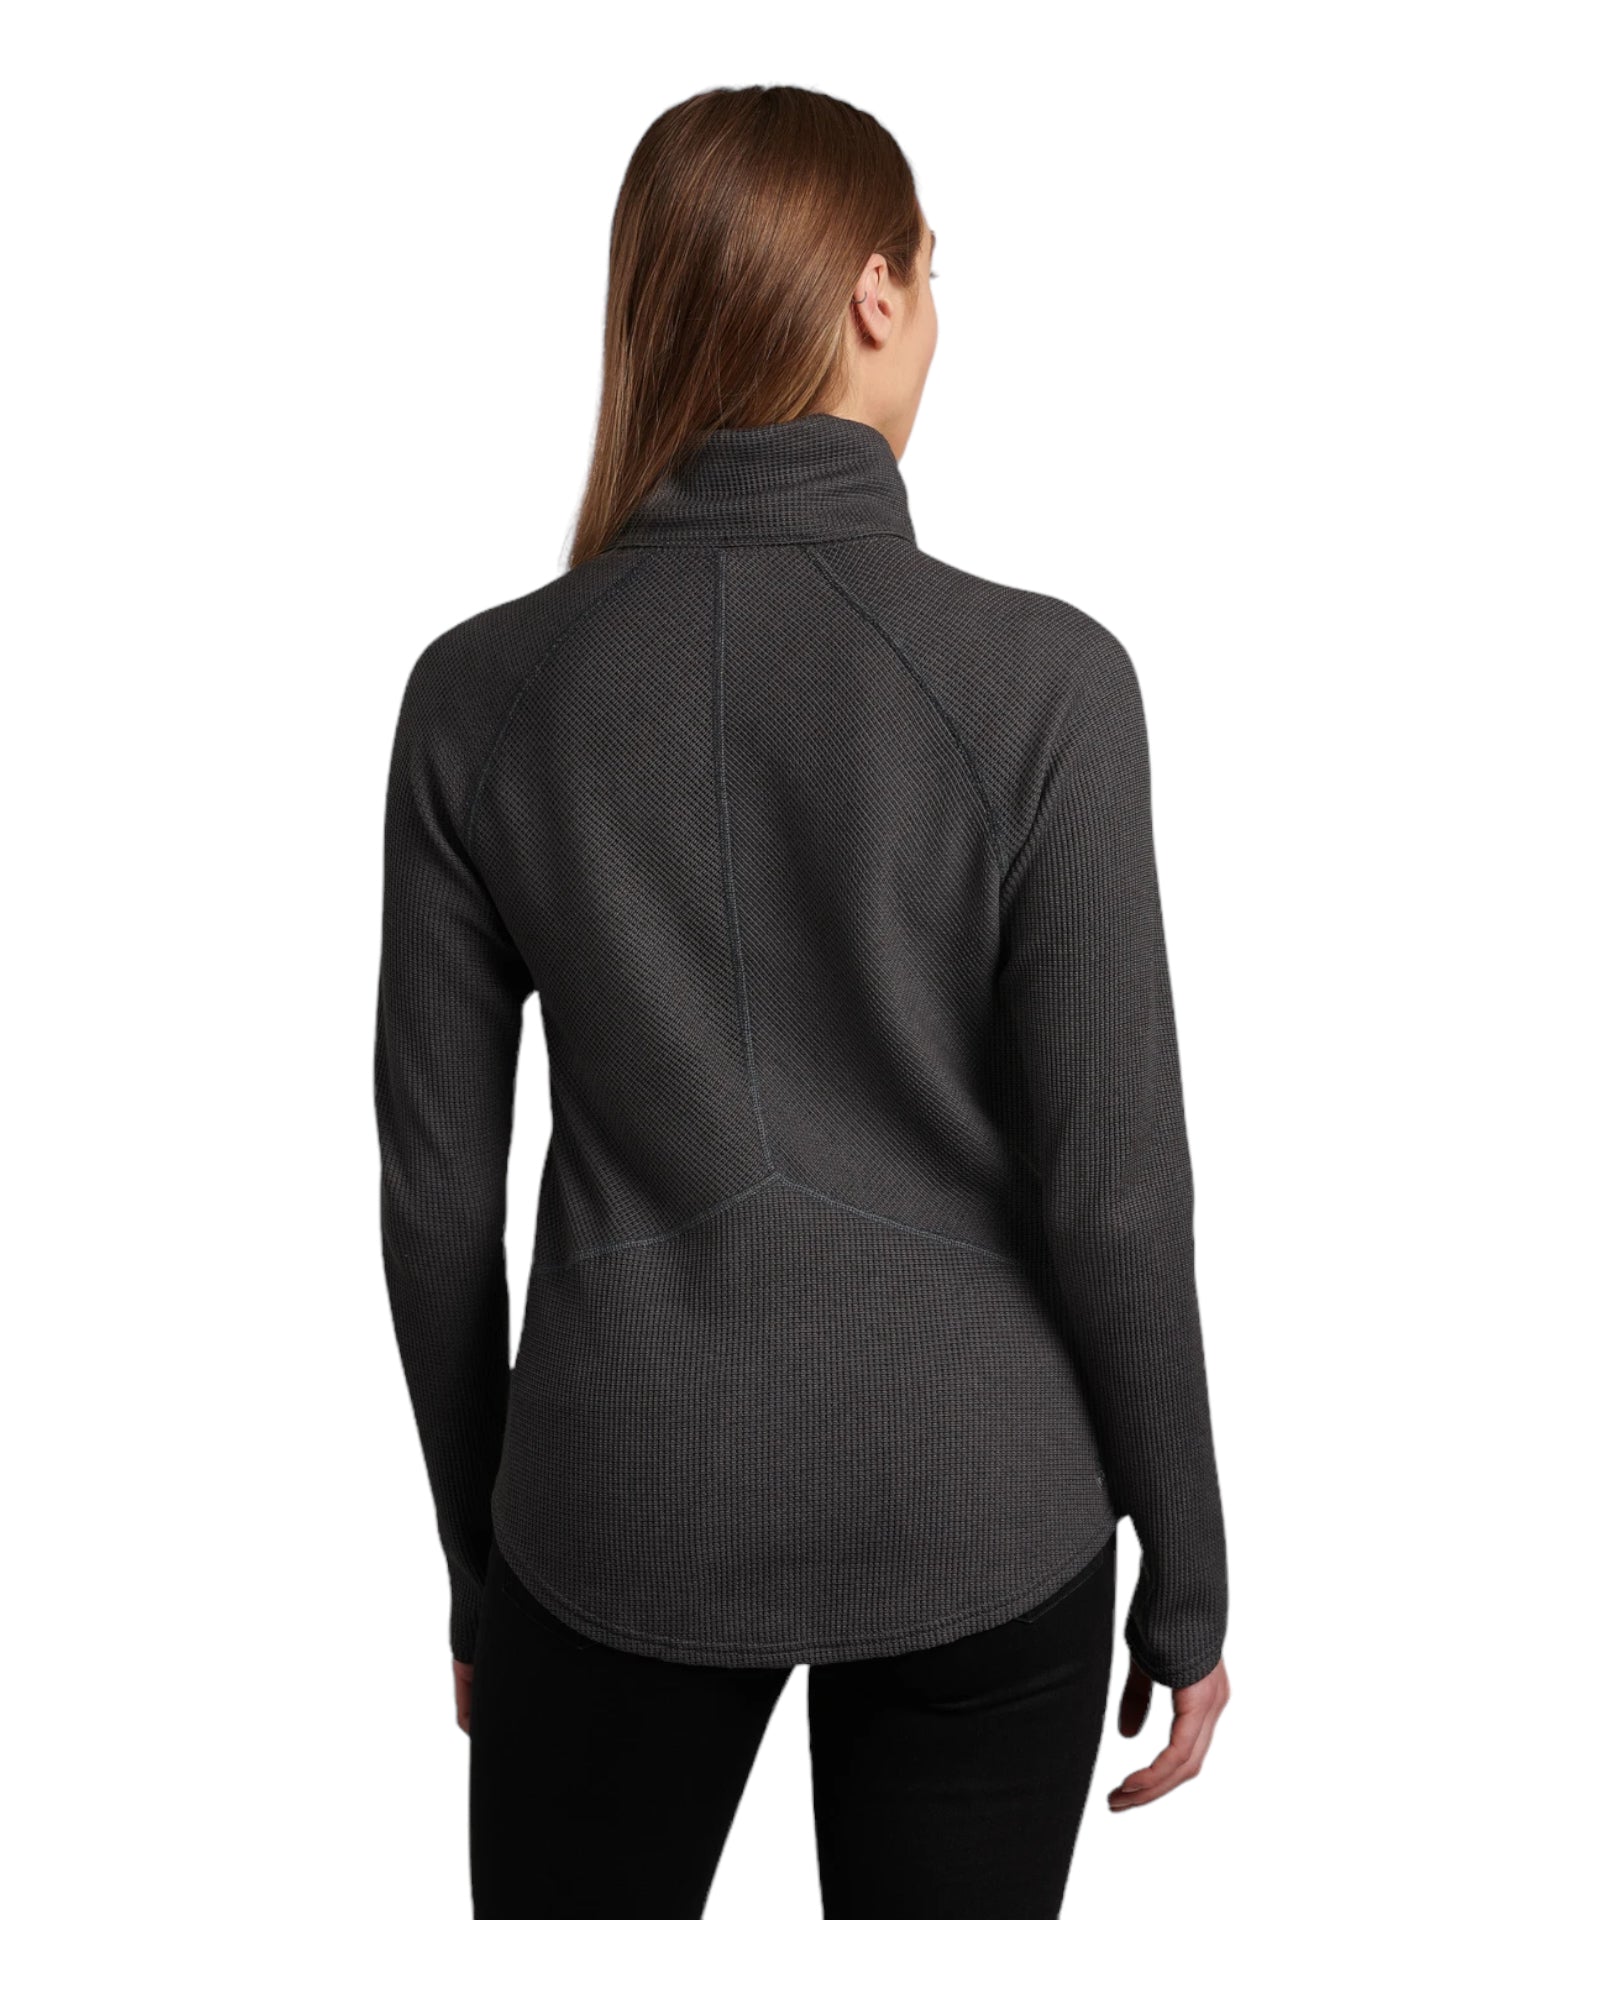 The PETRA TURTLENECK is perfect for chilly days and nights. With flattering design lines and stylish, directional fabrics, this turtleneck updates a classic look with a modern touch. 